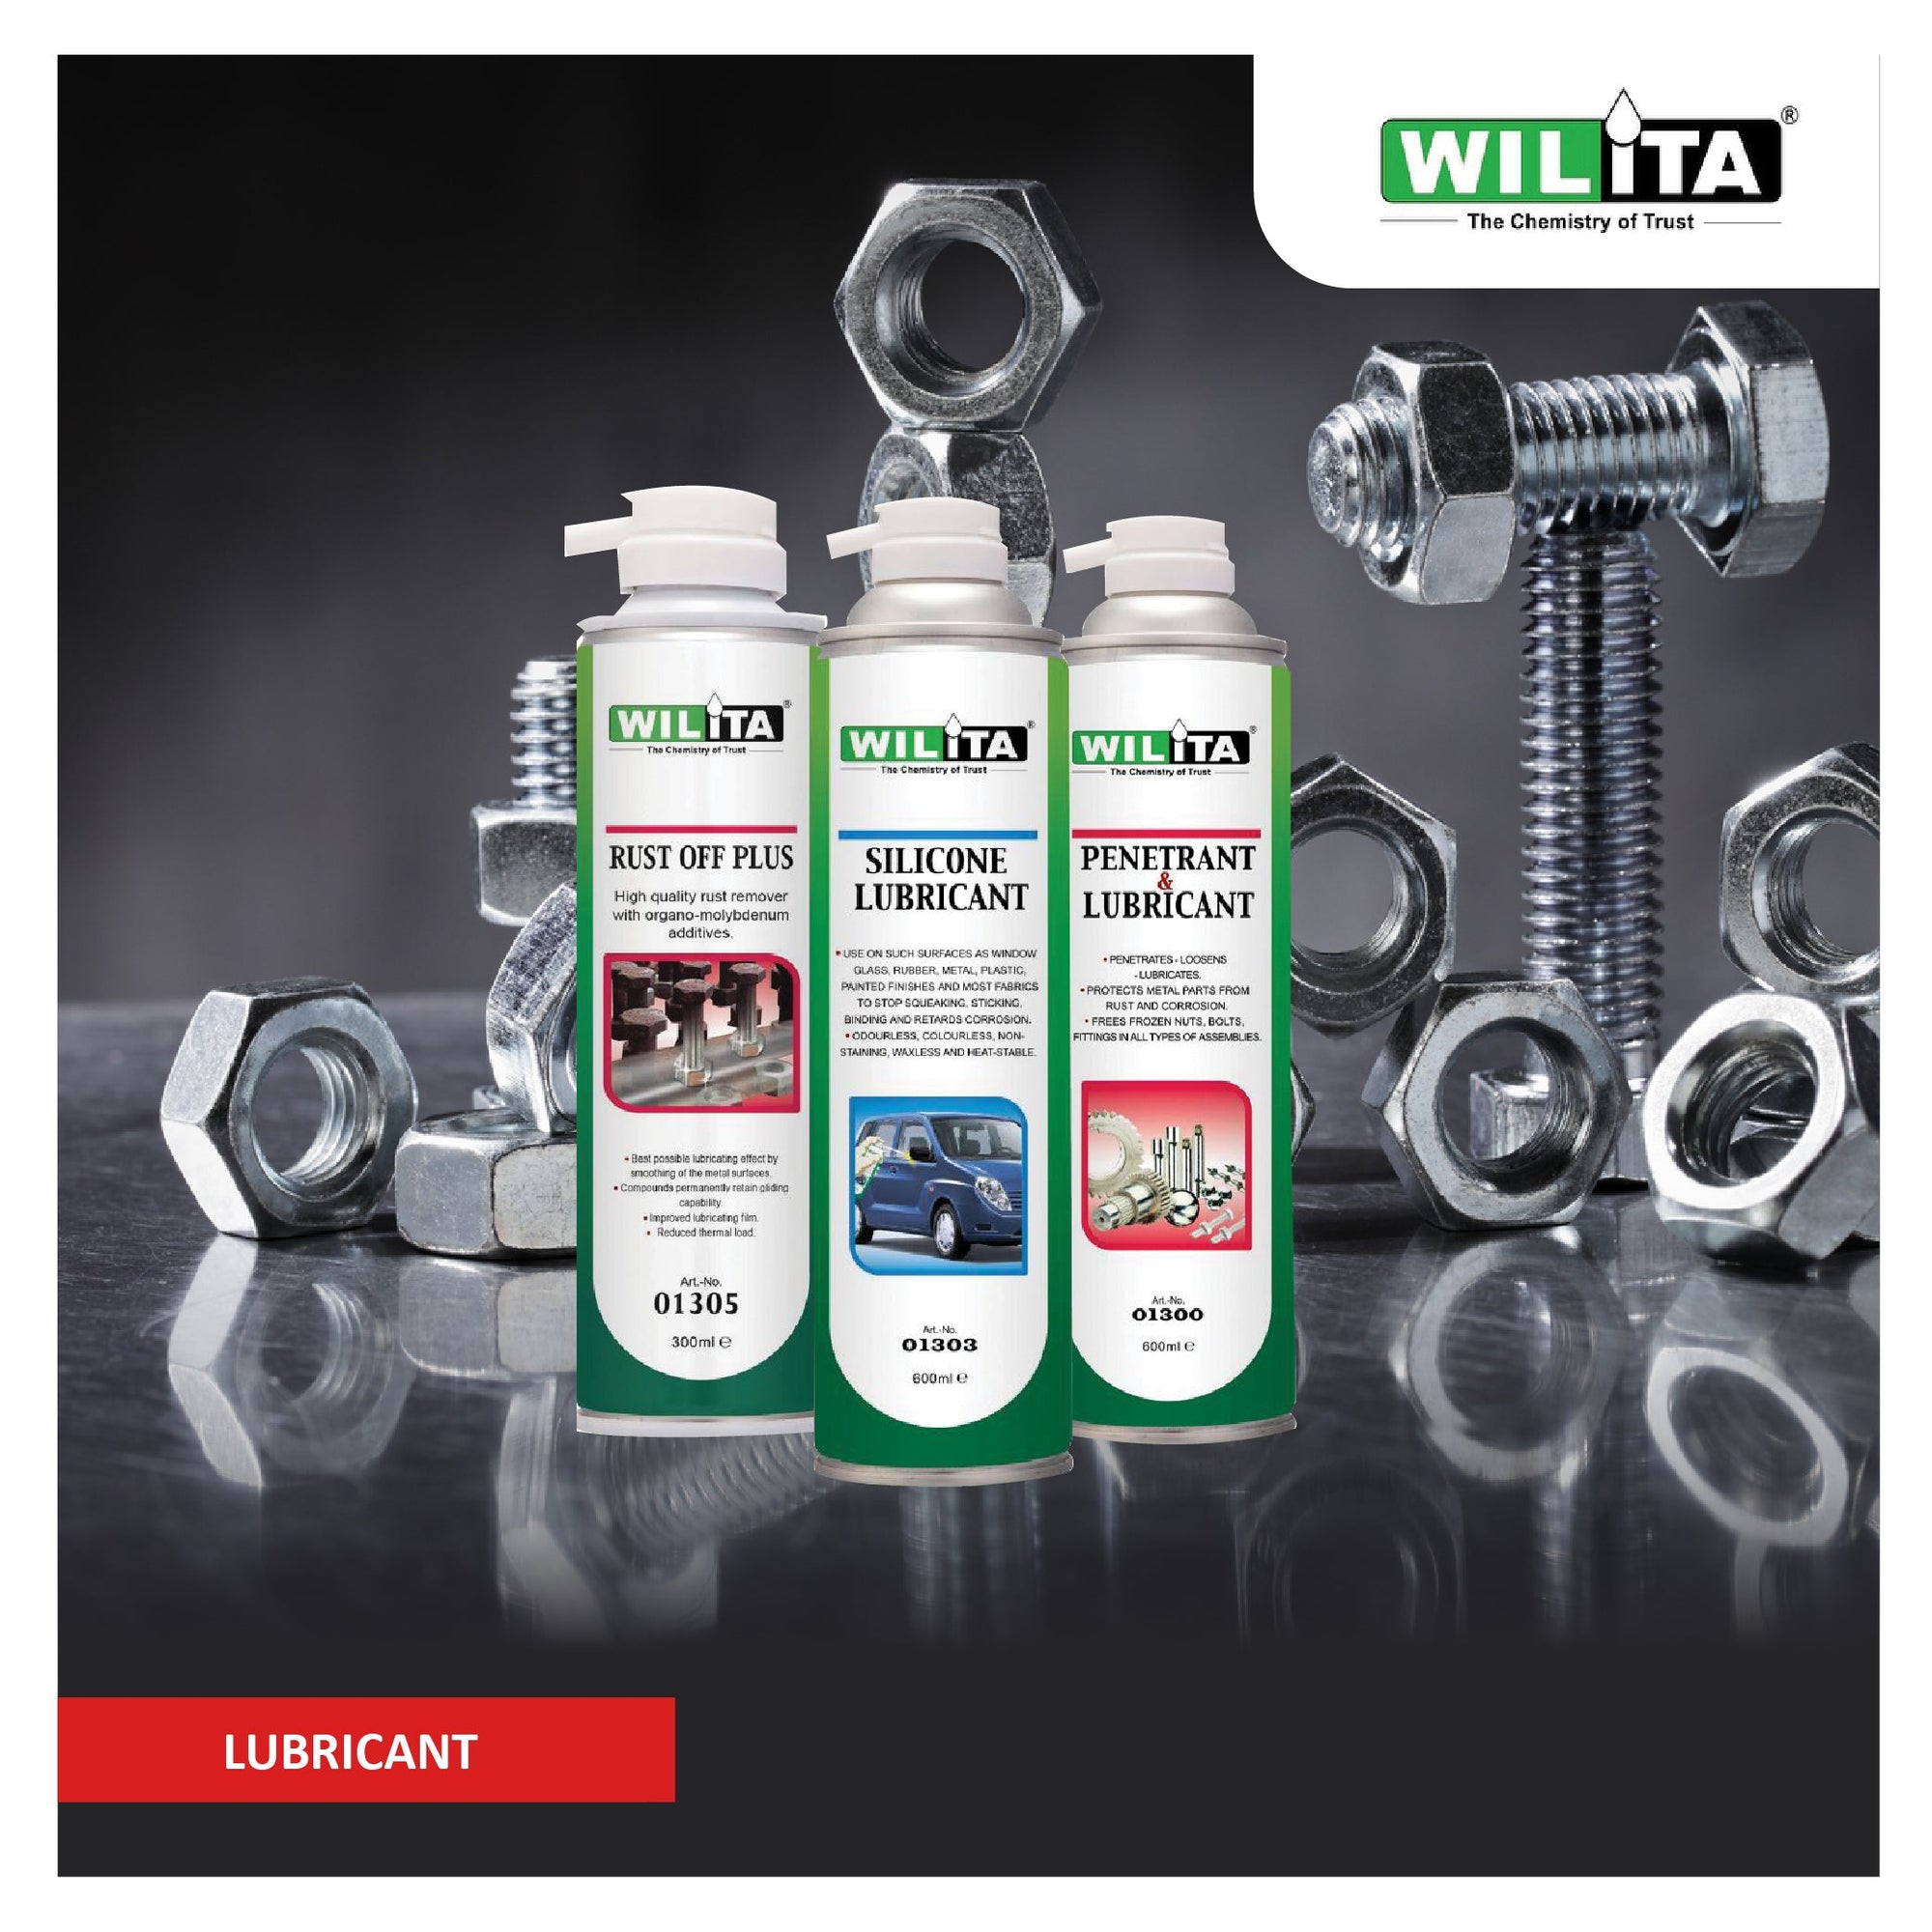 Wilita Lubricant - Premium Lubricants for Optimal Performance - Available at M. M. Noorbhoy & Co.